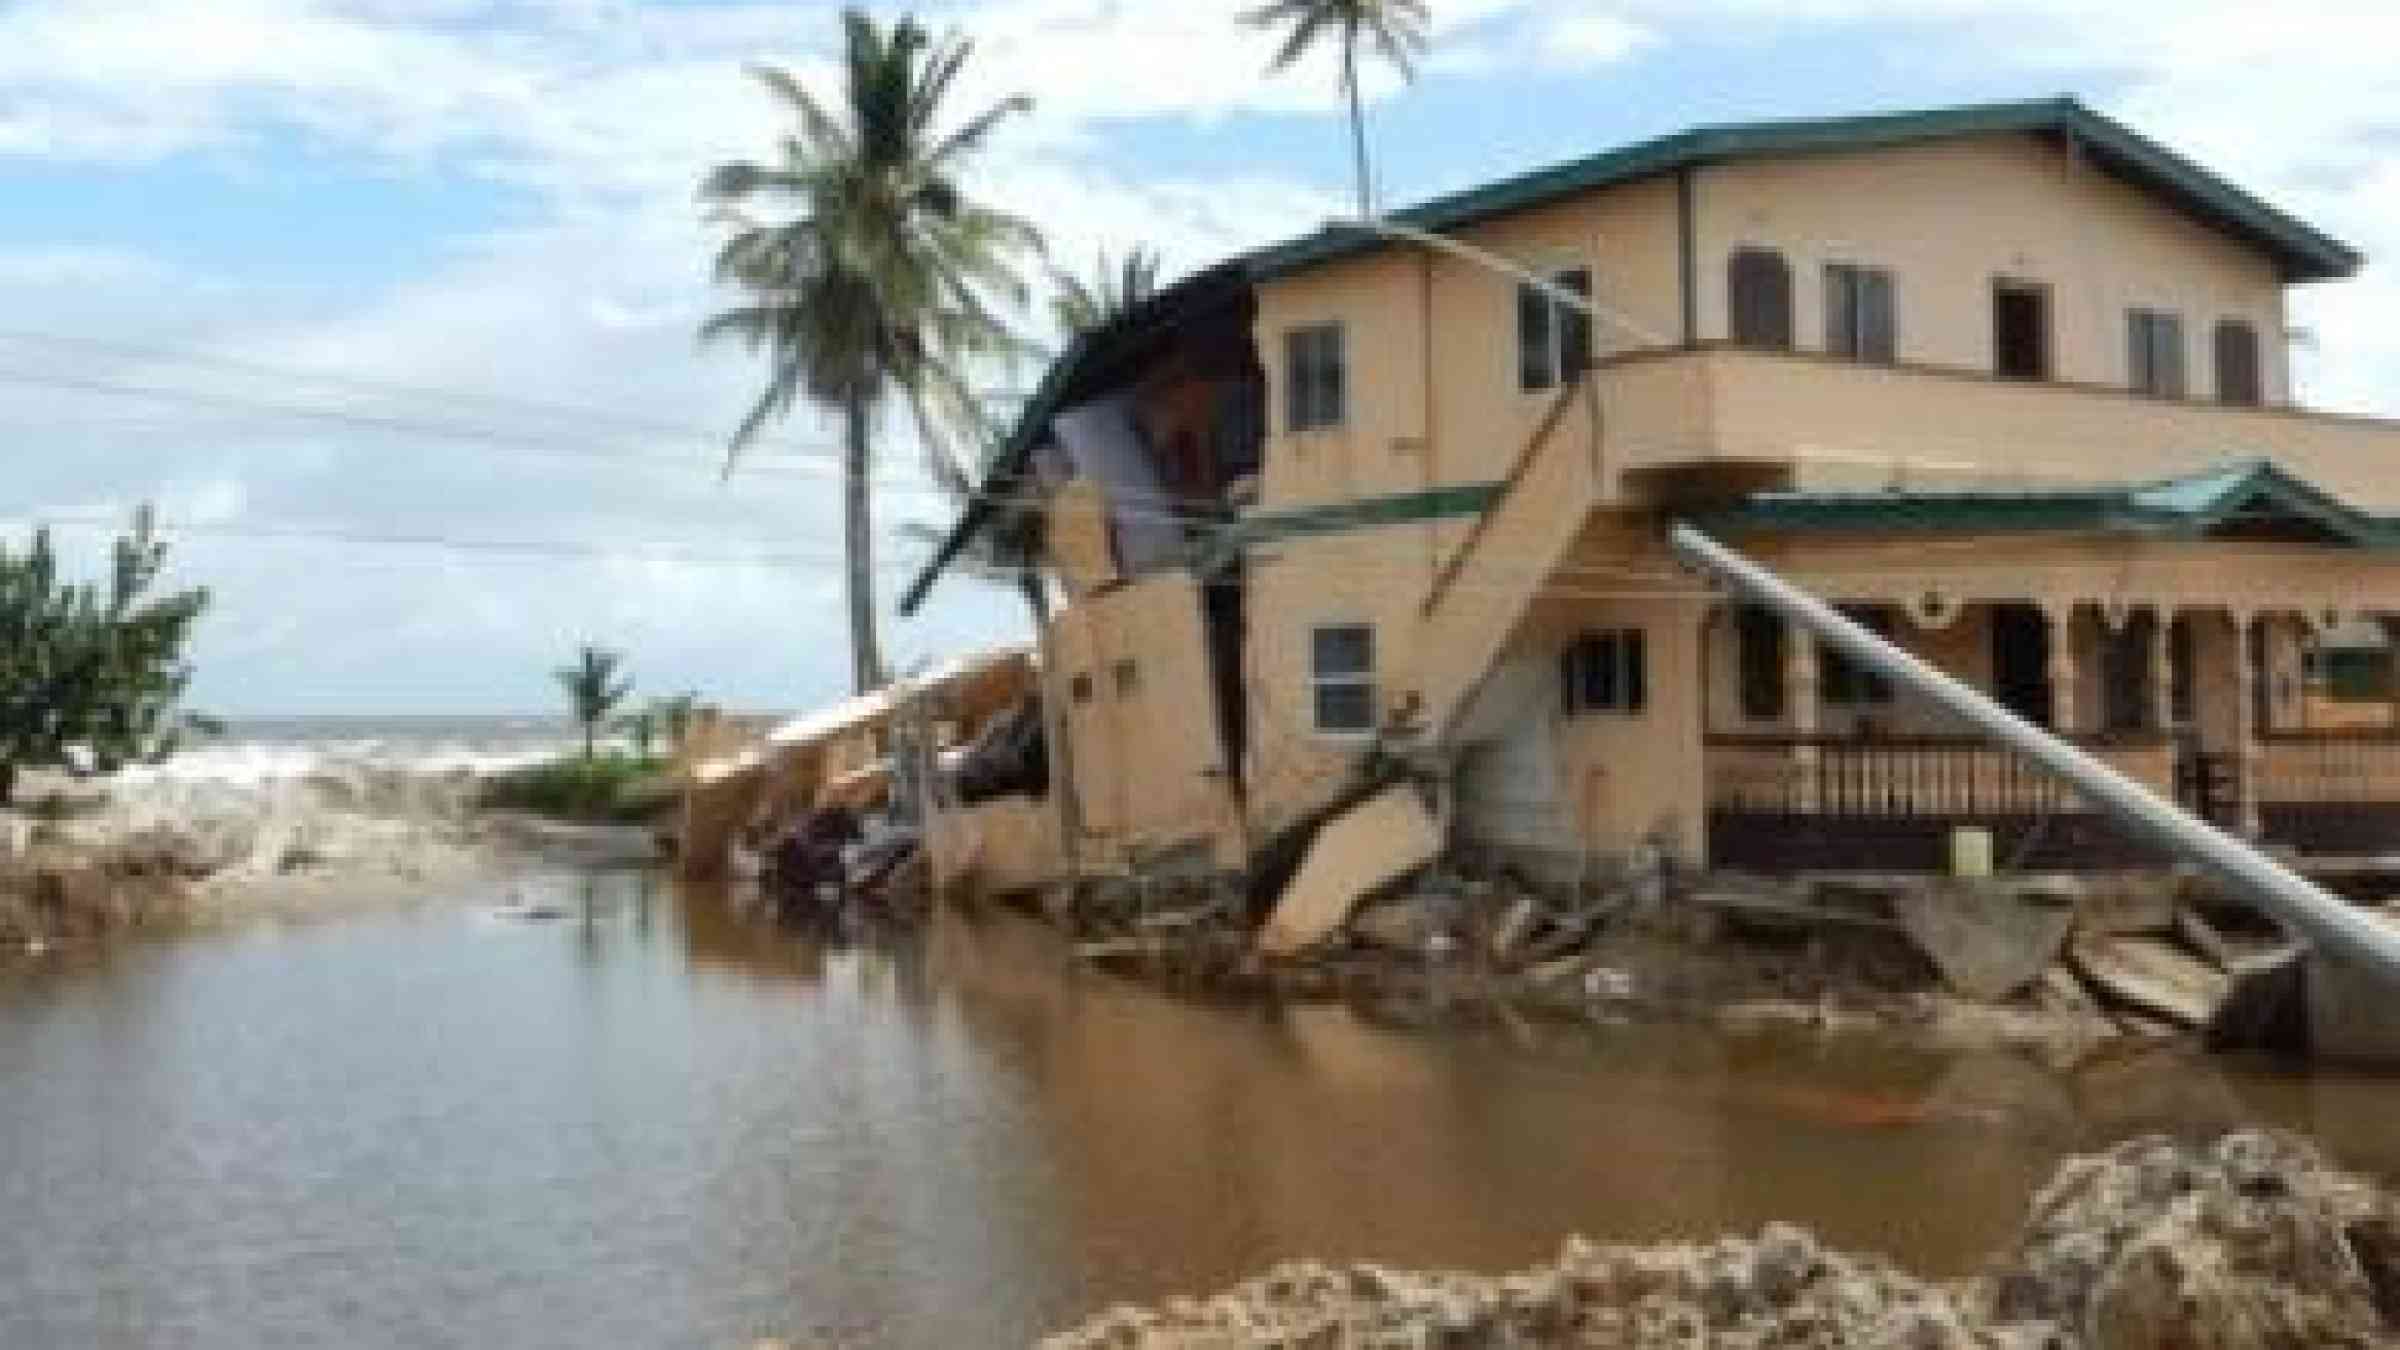 Photo by Rajiv Jalim UNISDR Damages in the aftermath of the flood in Trinidad.